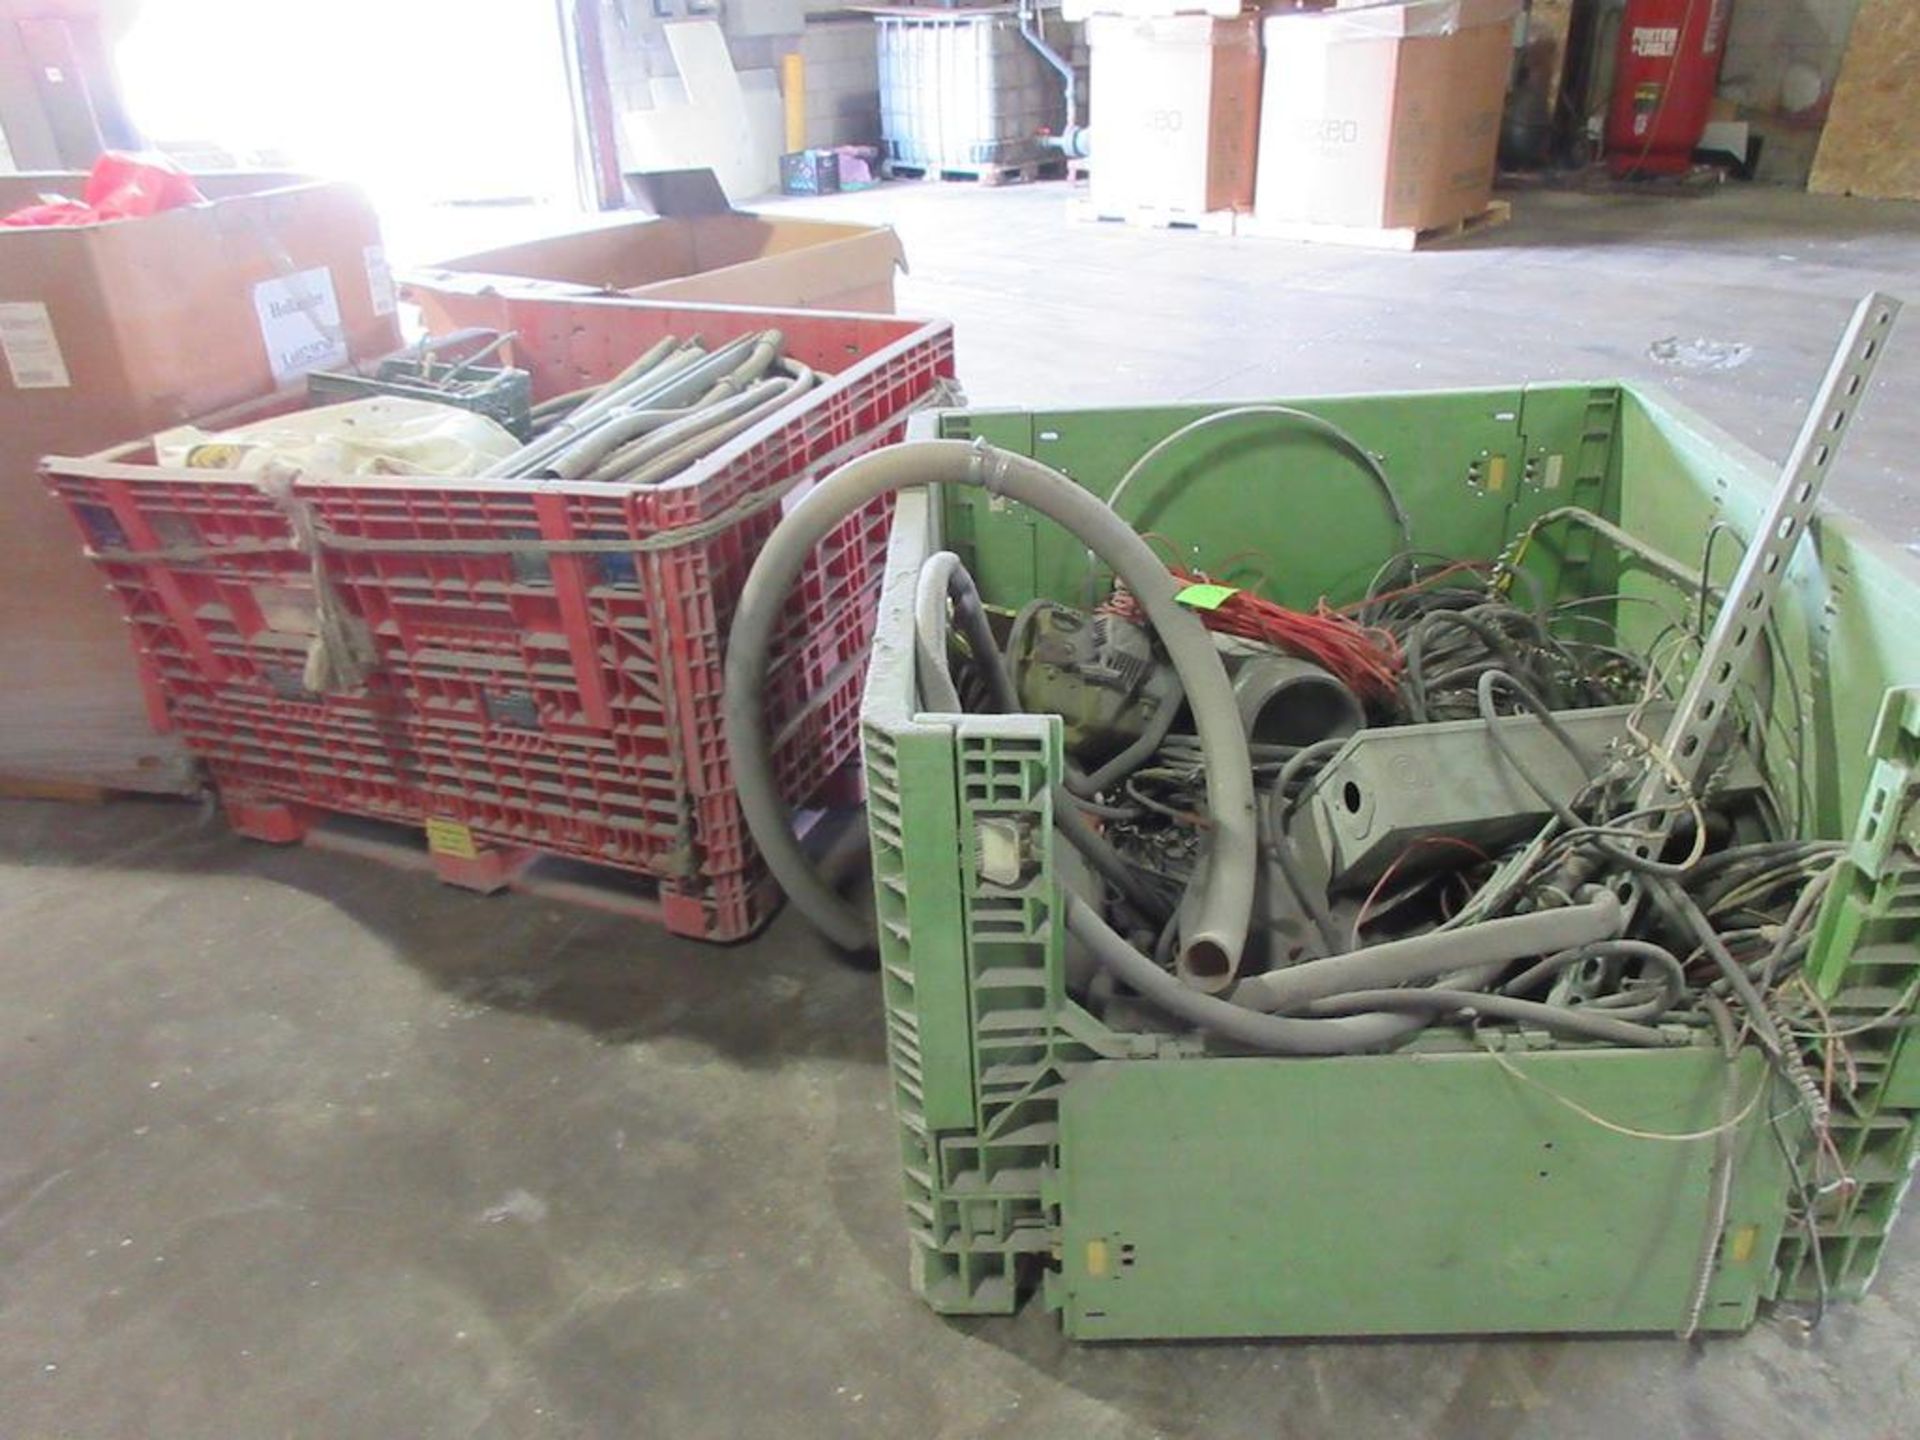 2 plastic Gaylords and 1 Pallet of Electrical Cabling, misc wires etc. - Image 6 of 6